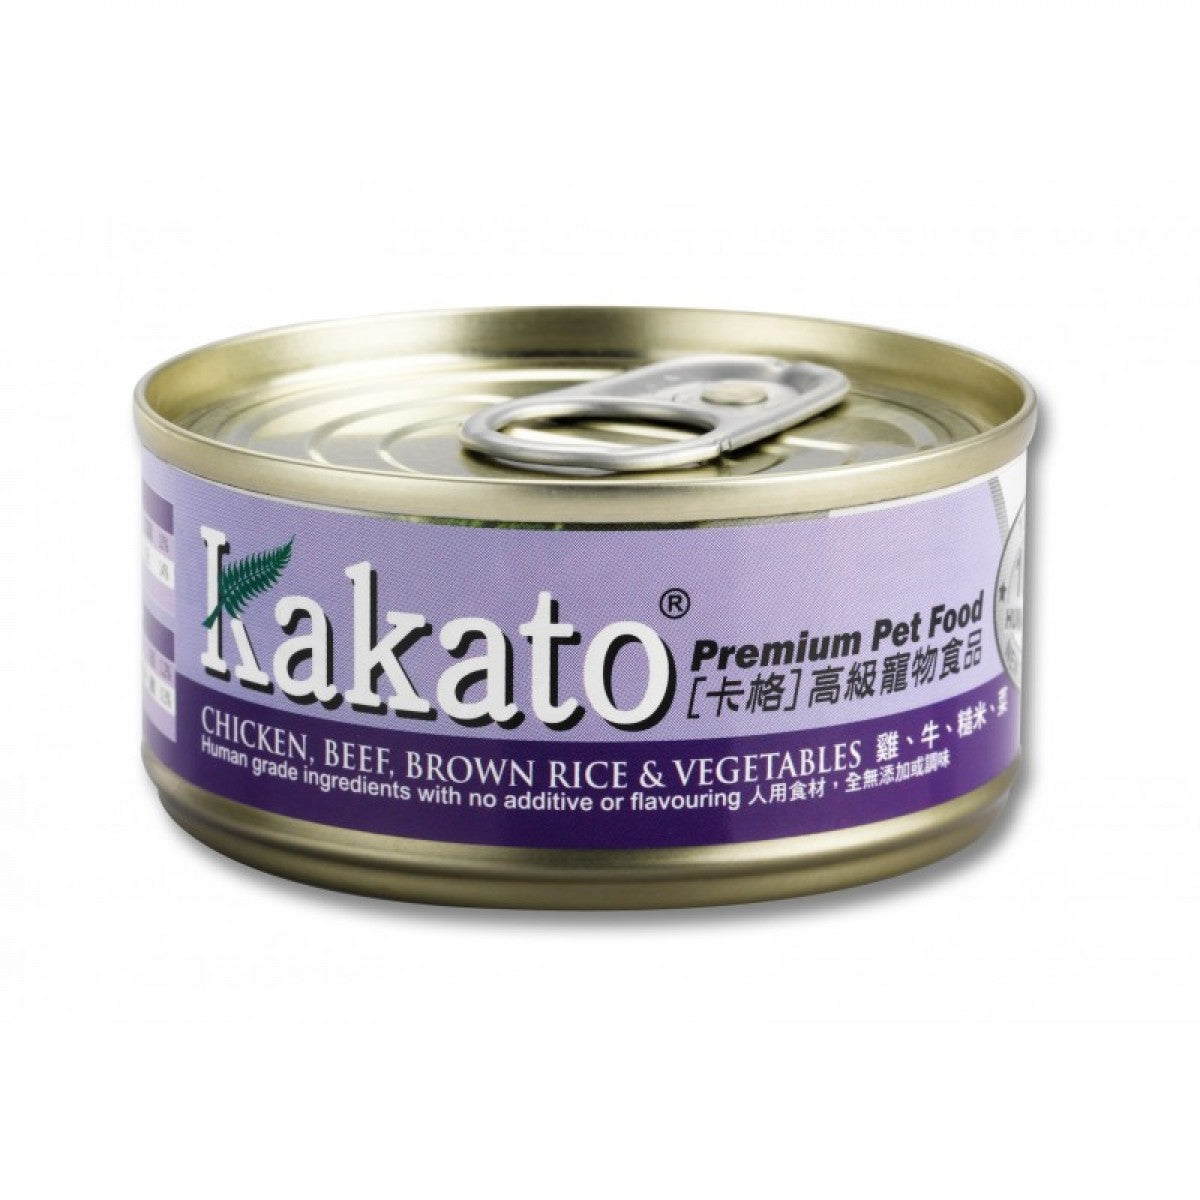 Kakato - Chicken, Beef, Brown Rice & Vegetables canned from Vetopia